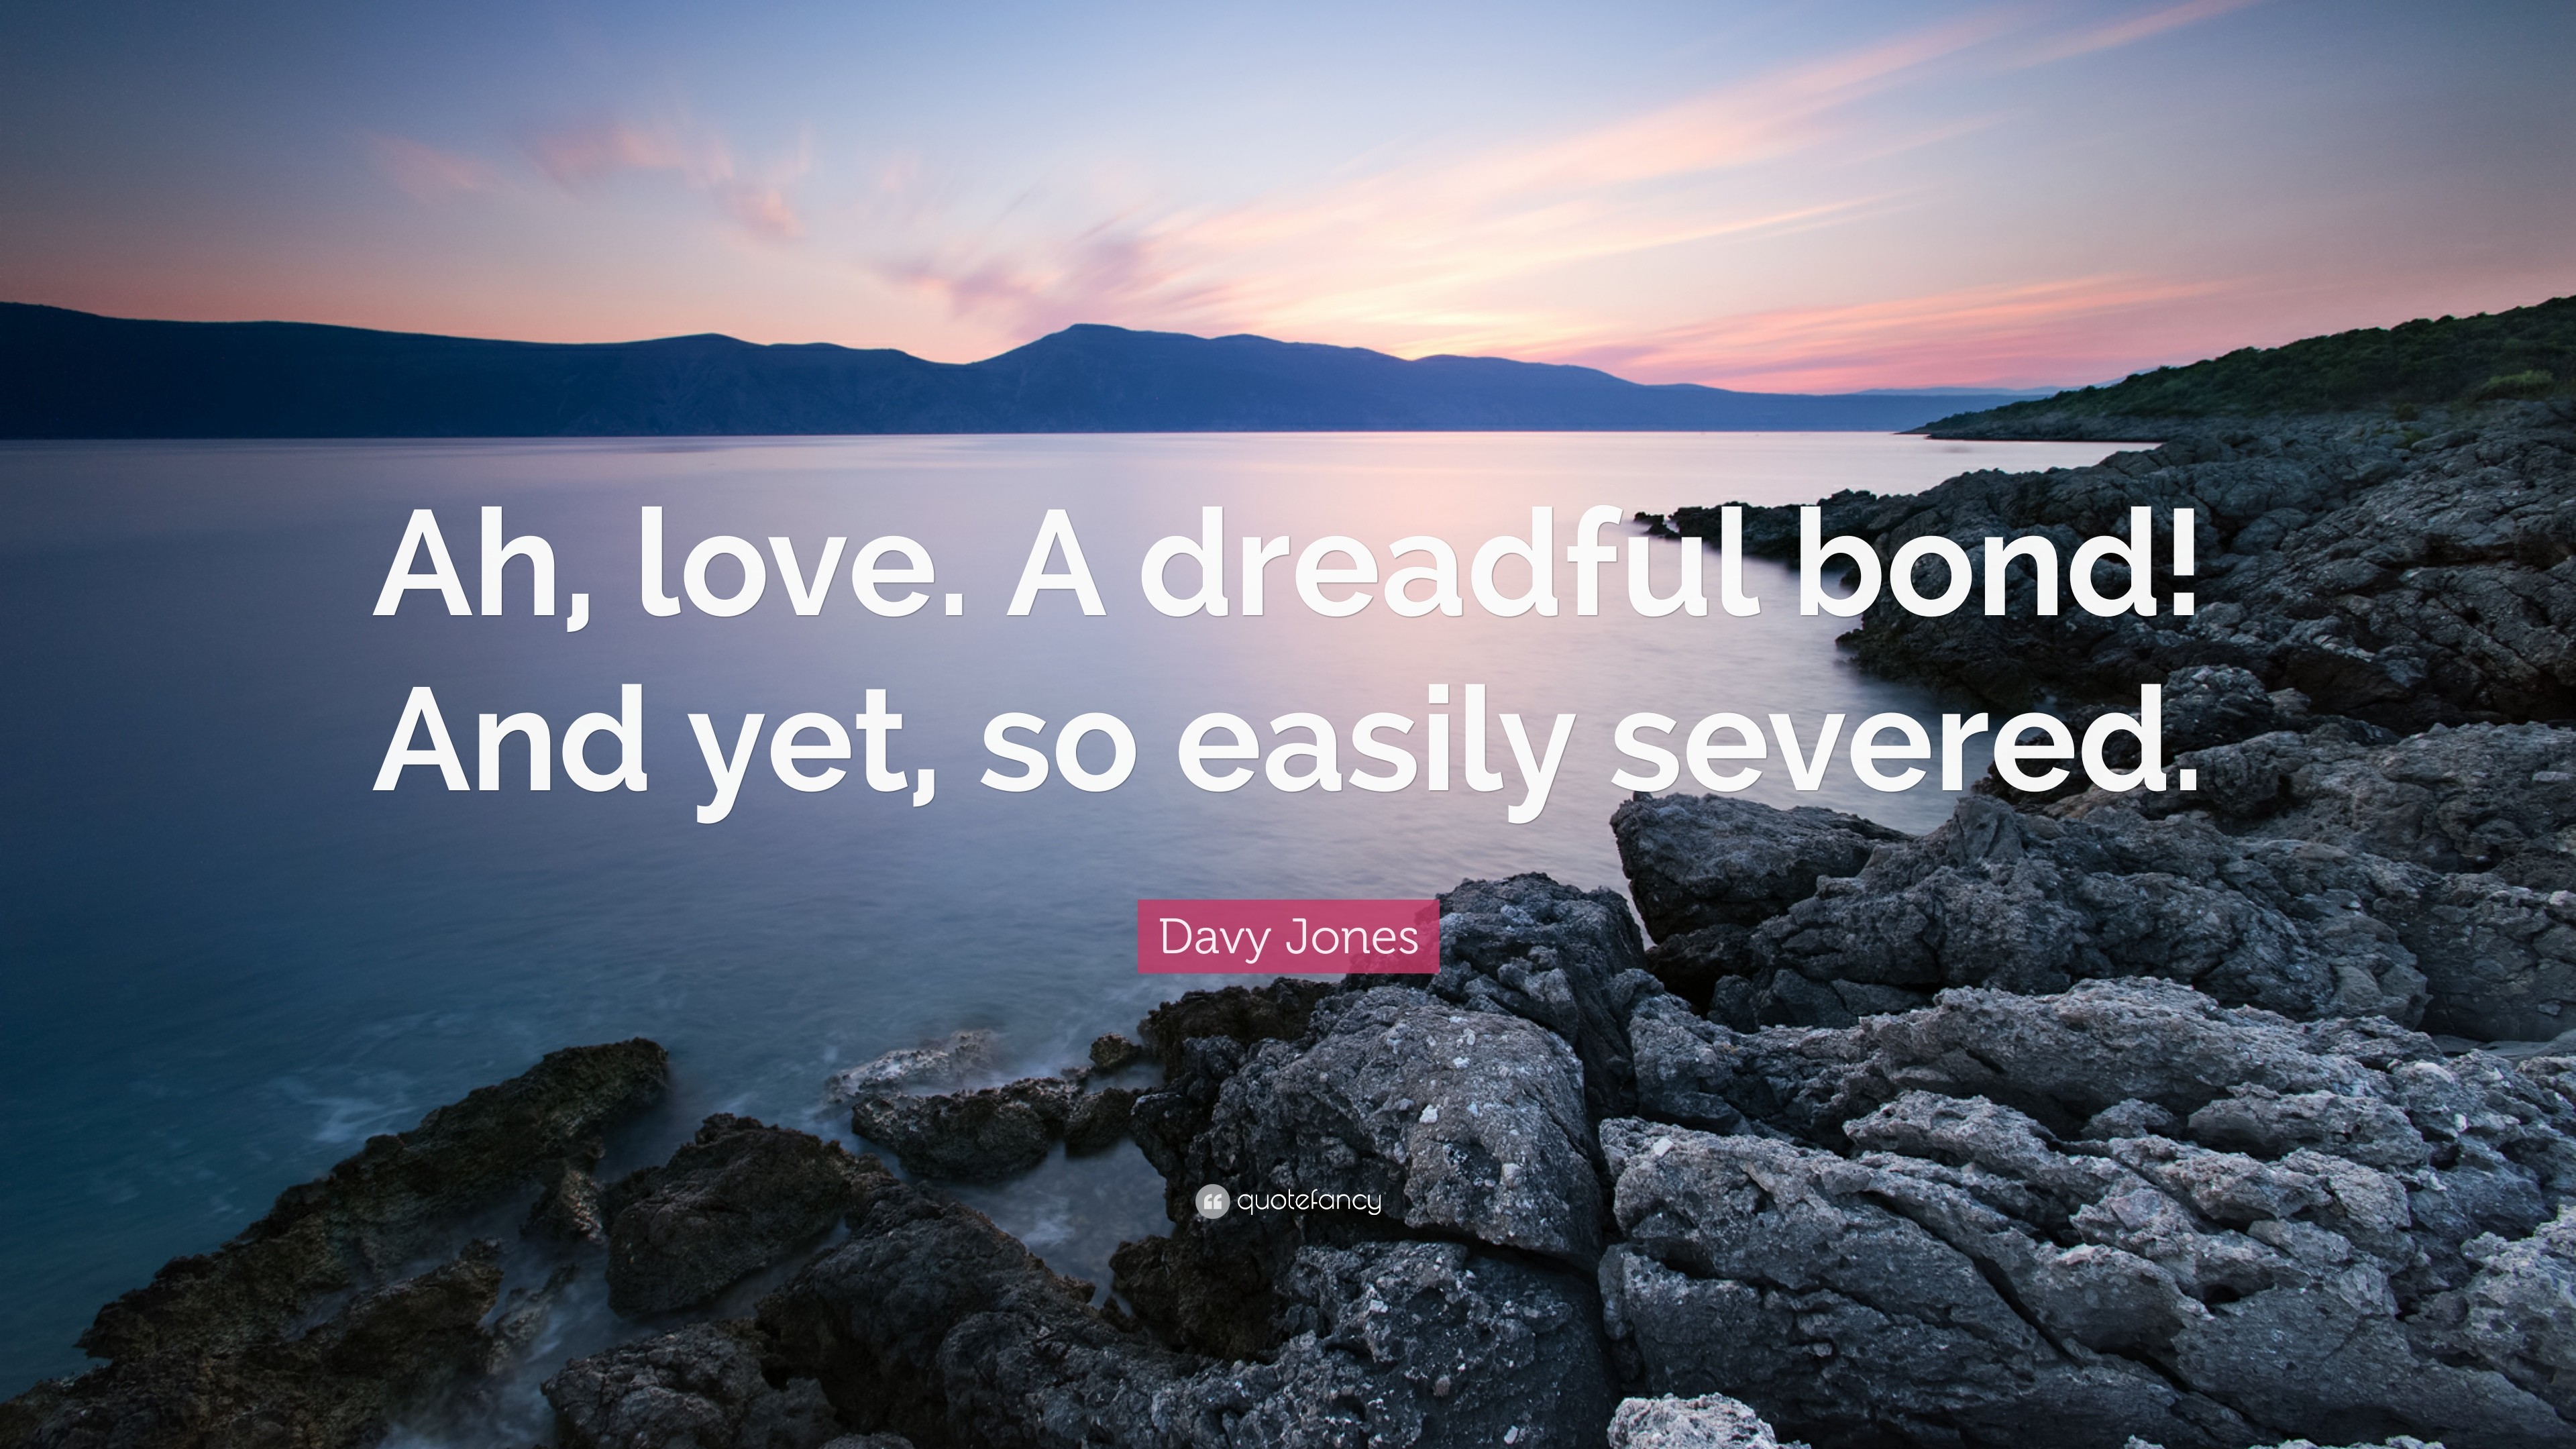 3840x2160 Davy Jones Quote: “Ah, love. A dreadful bond! And yet,